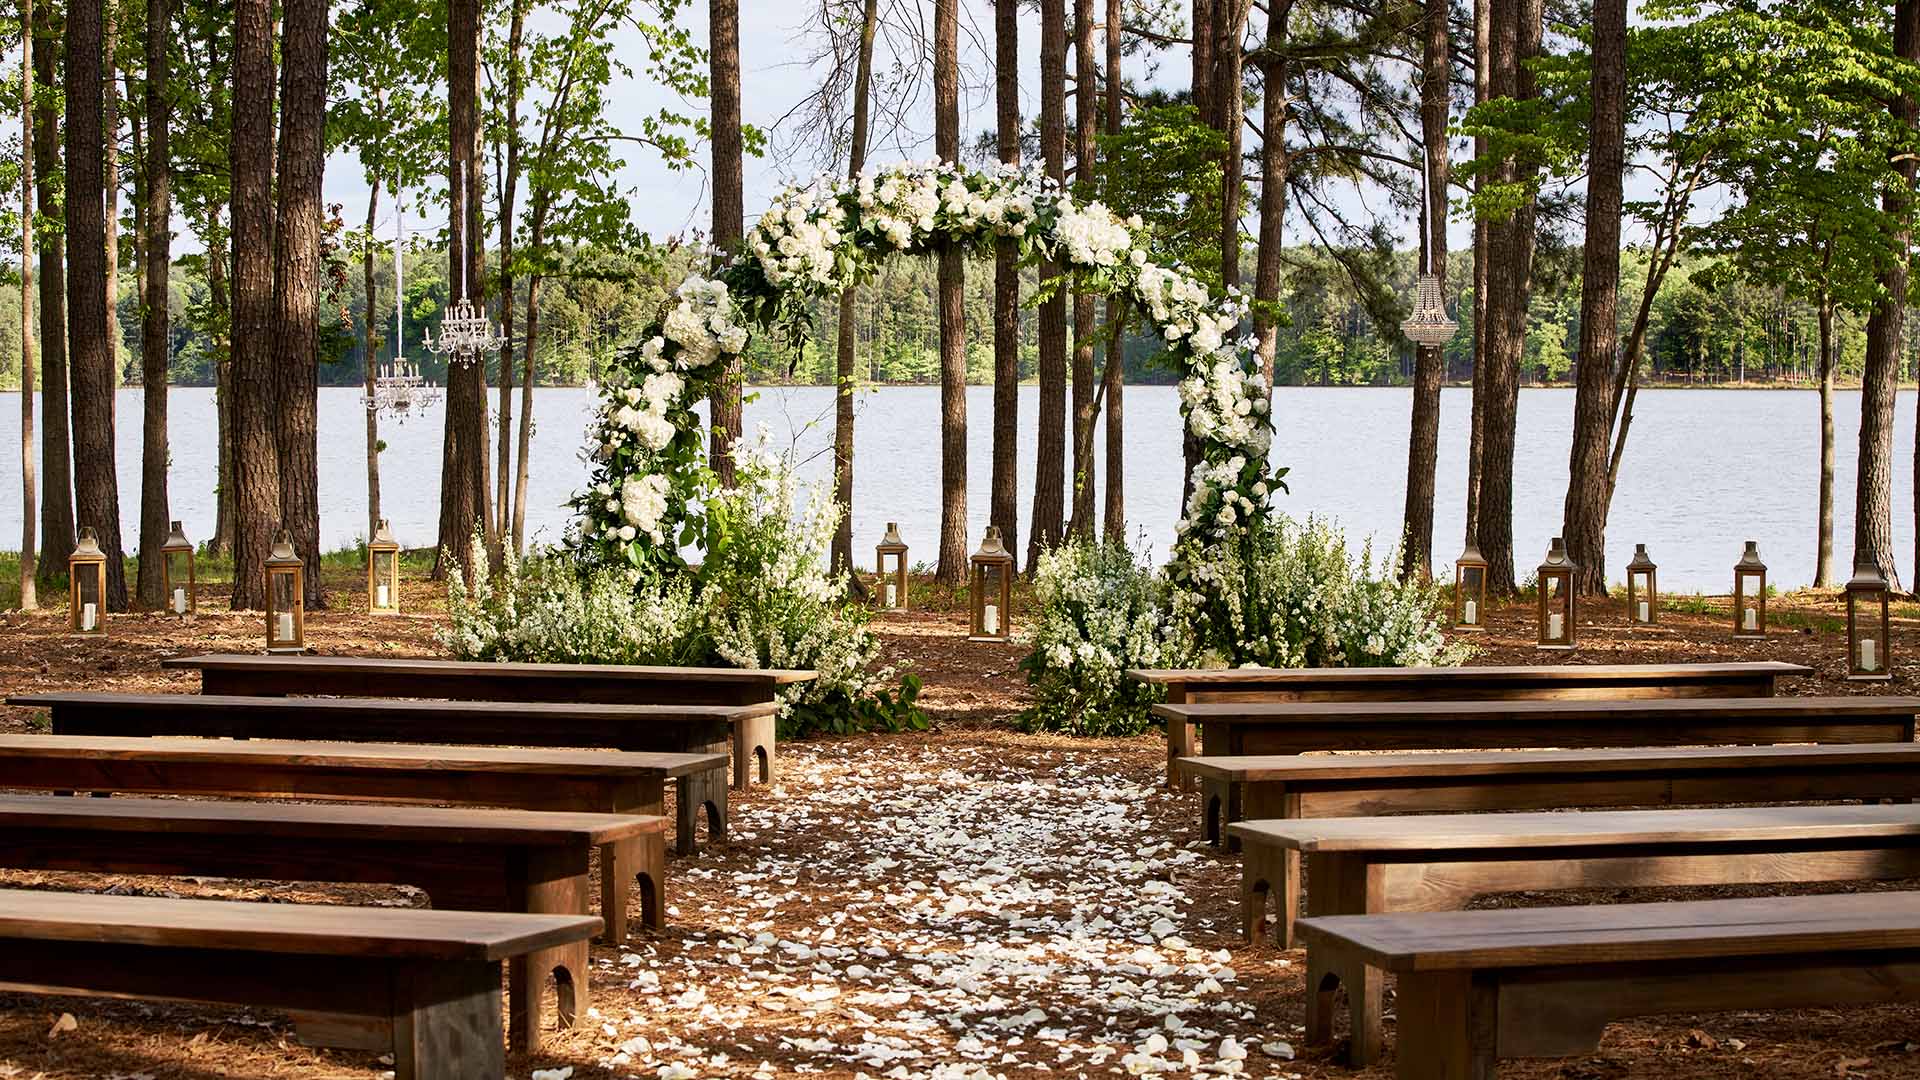 A rustic wedding ceremony set up near the lake